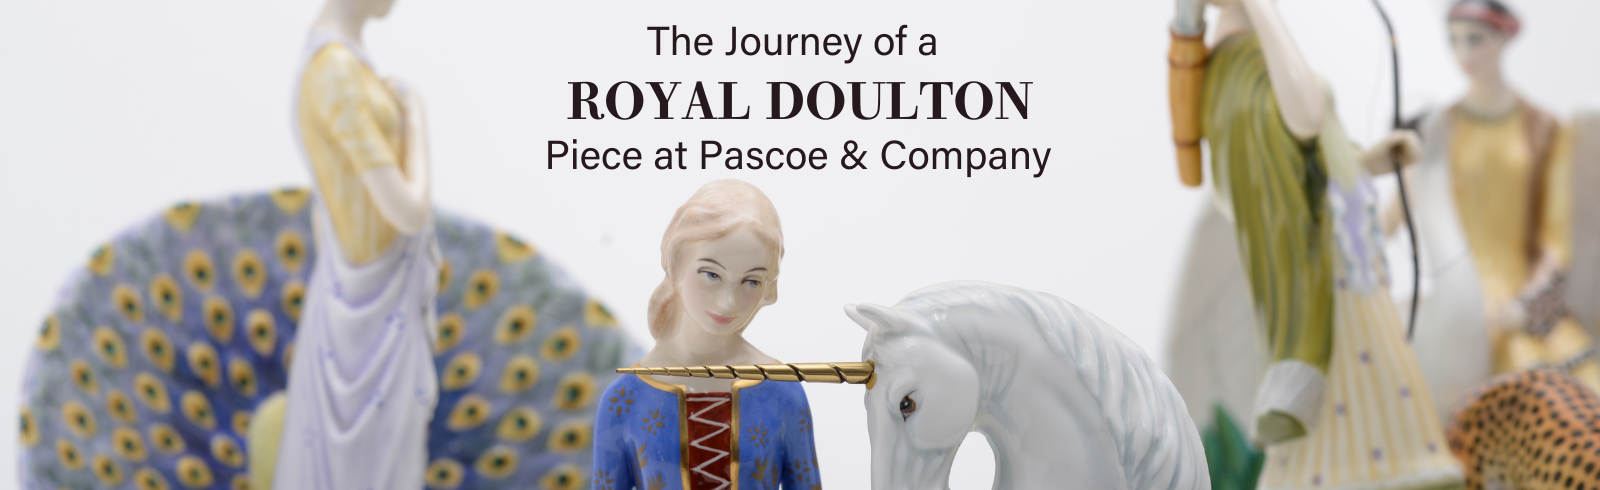 The Journey of a Royal Doulton Piece at Pascoe & Company